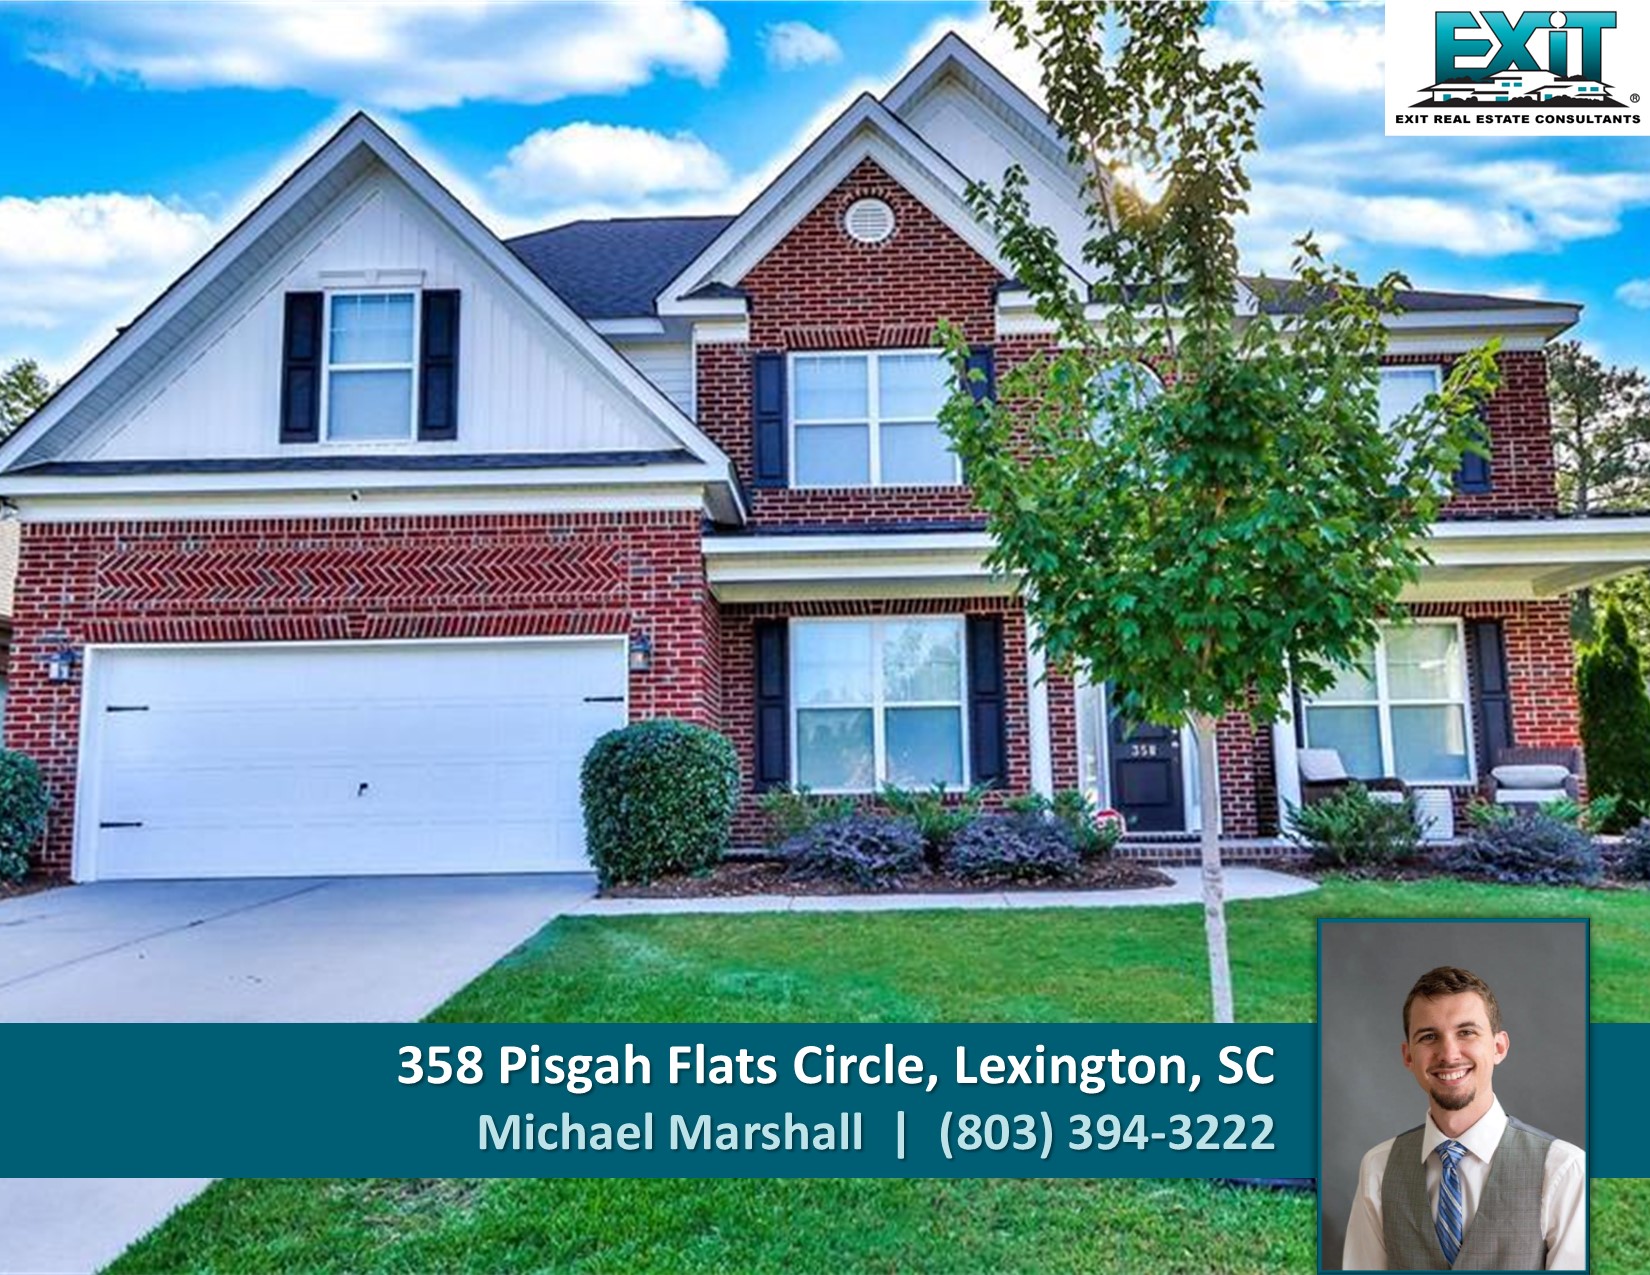 Just listed in Pisgah Flats